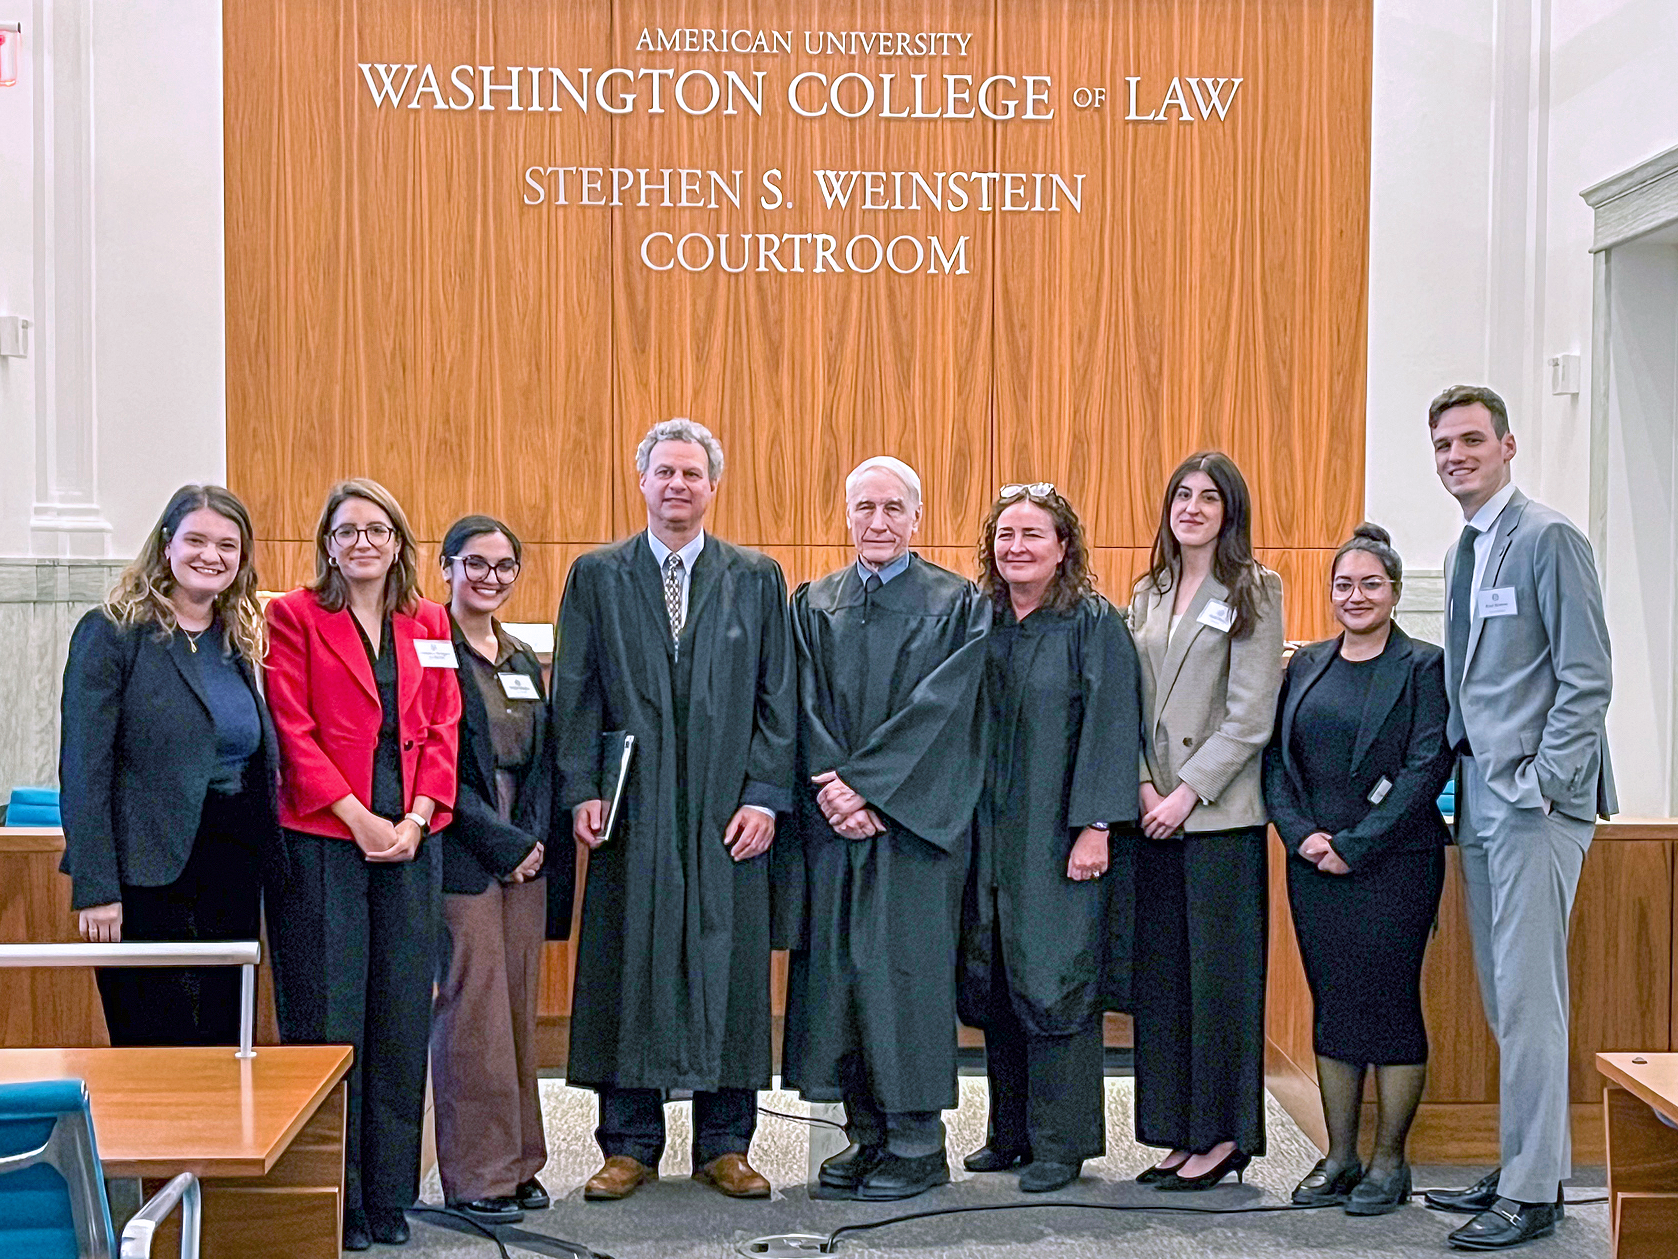 Moot Court Competition group photo